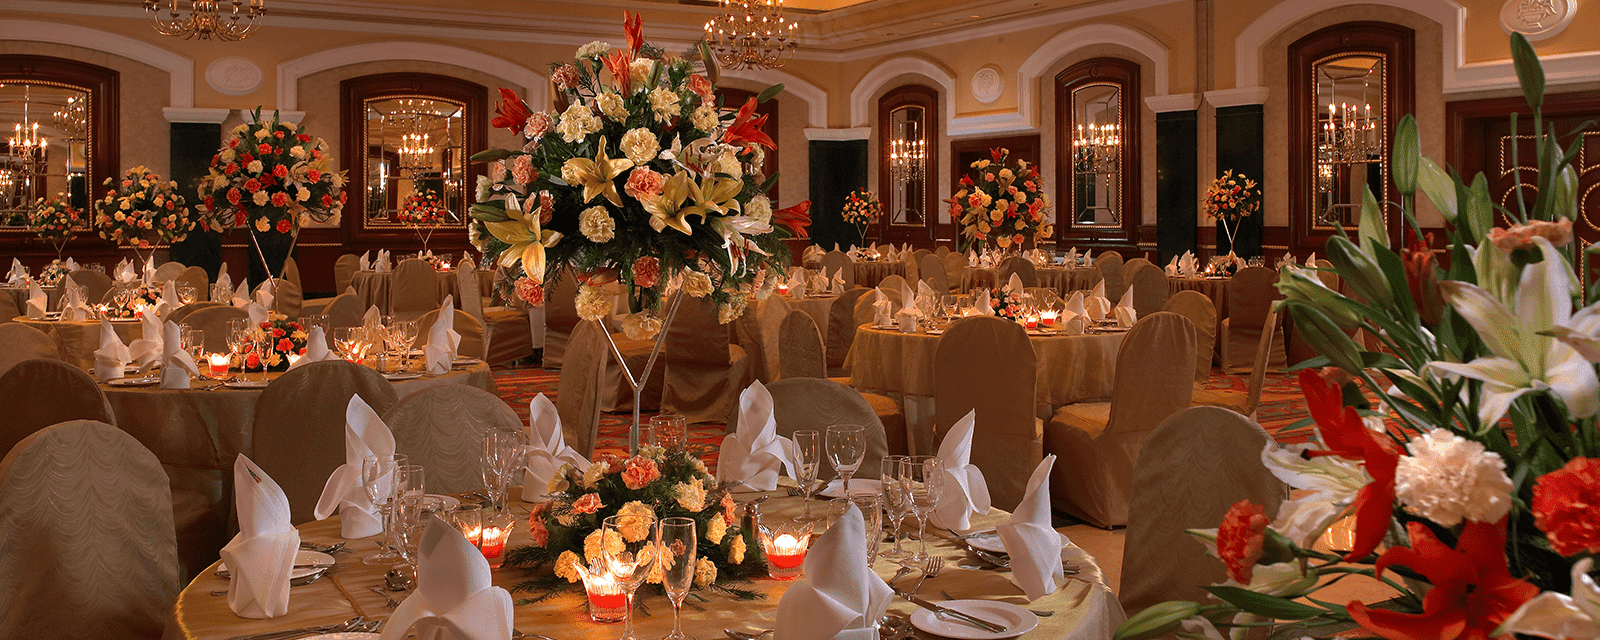 weddings-itc-grand-central